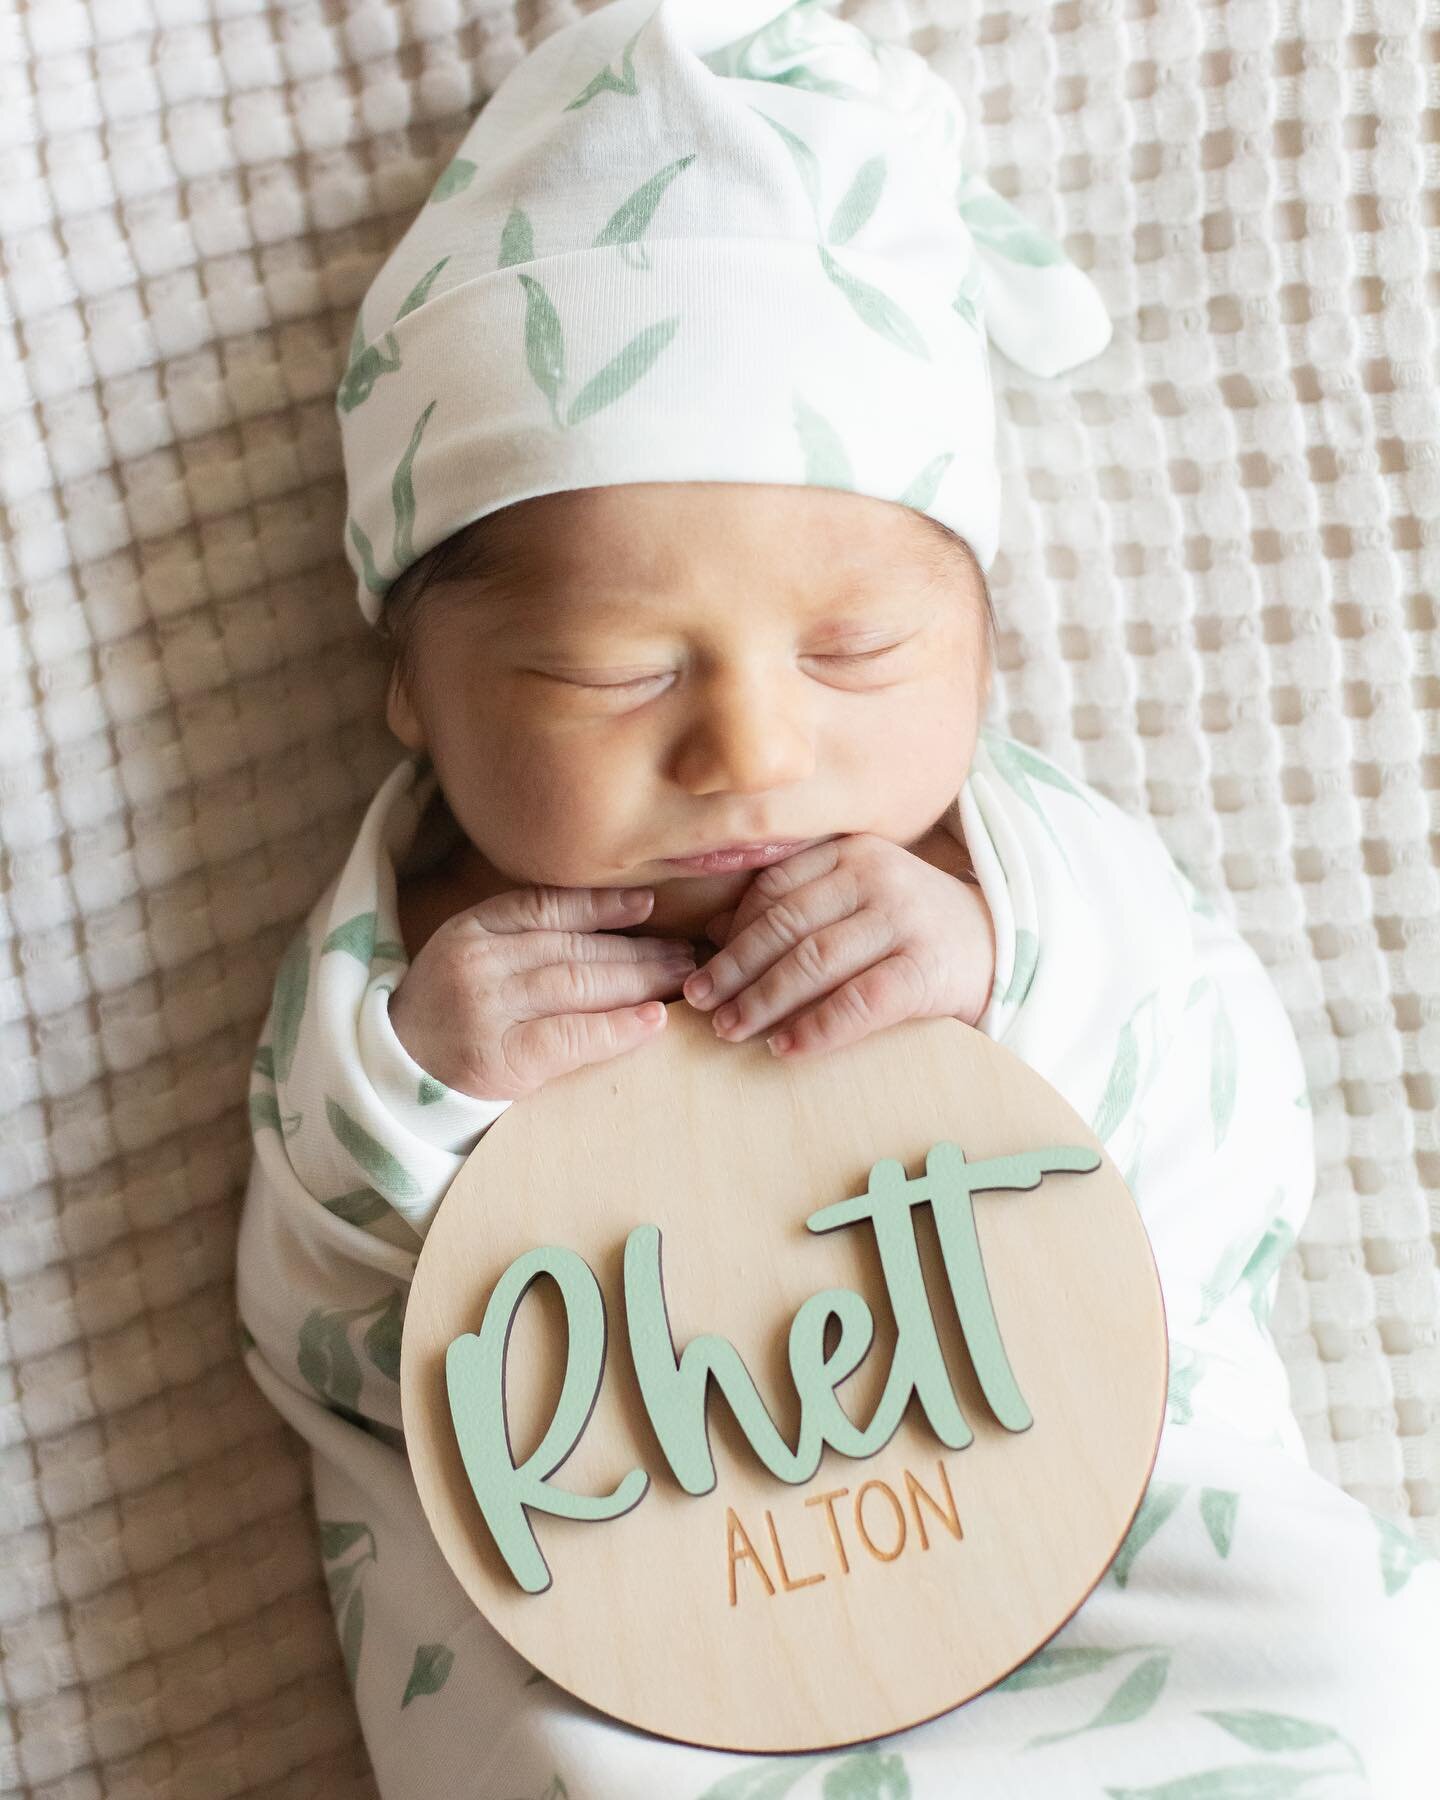 our miracle baby is here 😭🩵🙏🏻 IG fam, meet Rhett.

thank you to everyone for all of the messages, texts, calls &amp; support. thank you also for being on this crazy journey with us. we feel the love and love you all right back 💕

brb - in newbor